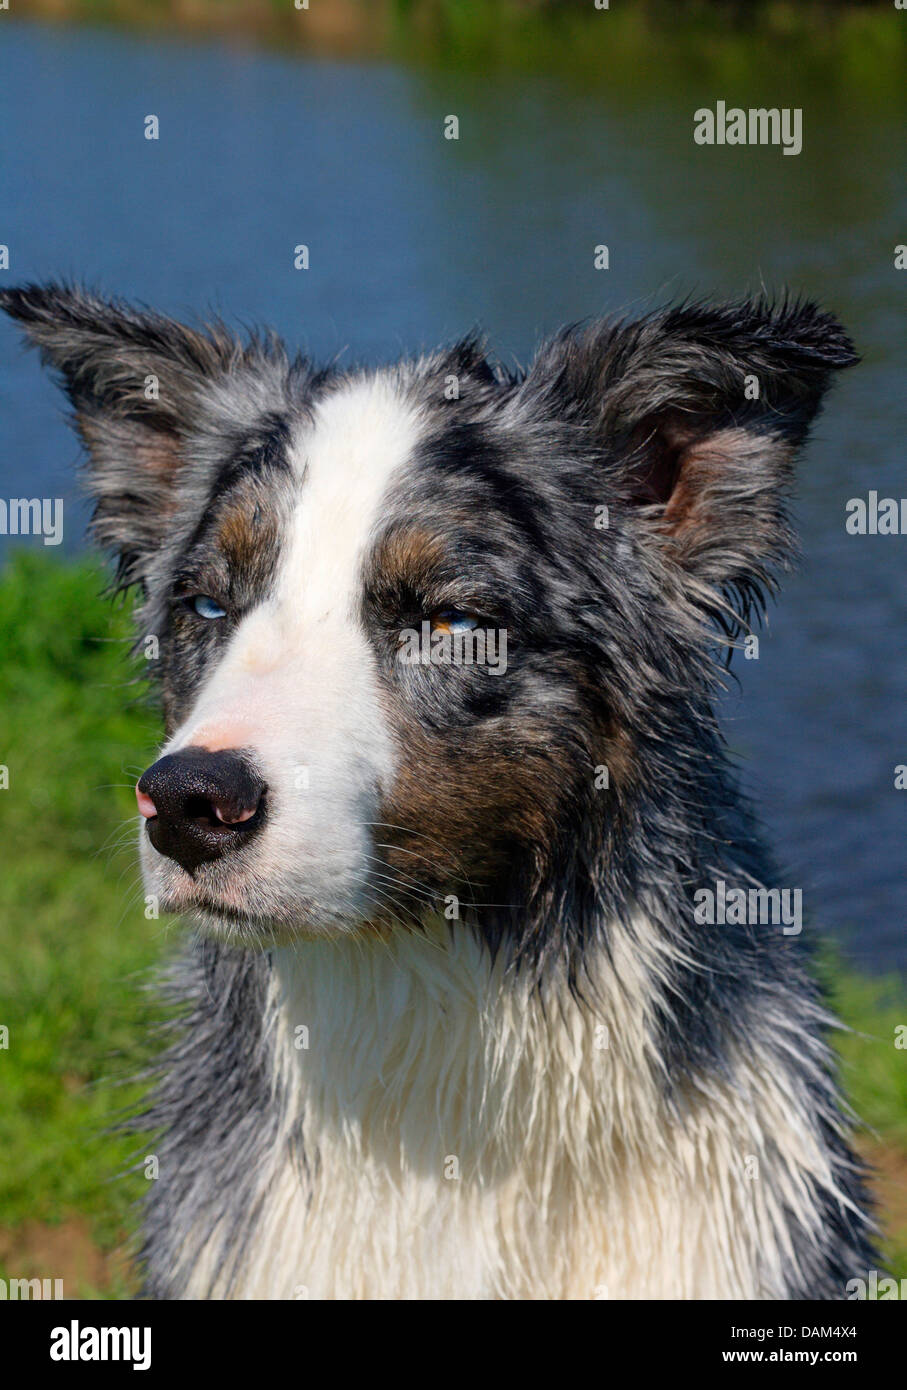 Australian Shepherd (Canis lupus f. familiaris), four-year-old female in Blue Merle colouration at a water shore, Germany Stock Photo